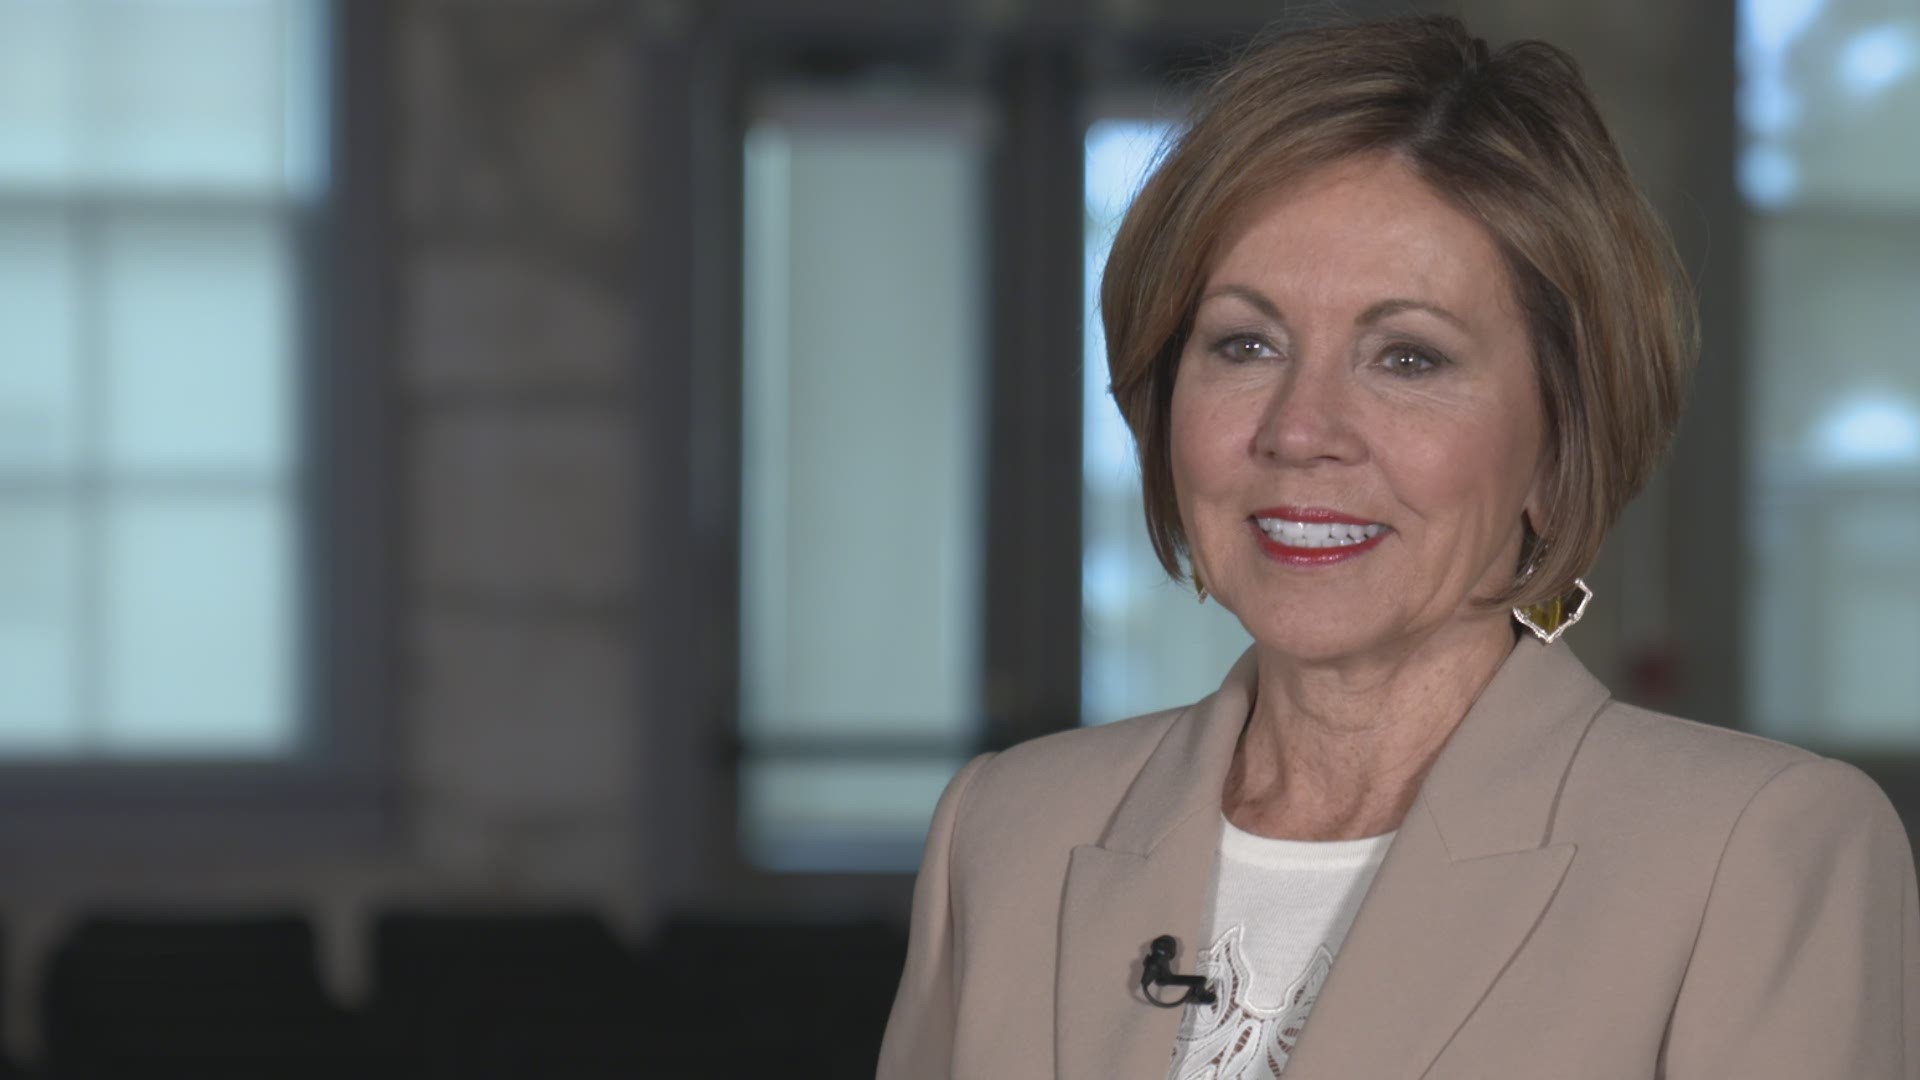 Sheryl Sculley on why she decided to retire after serving 13 years as San Antonio's City Manager.